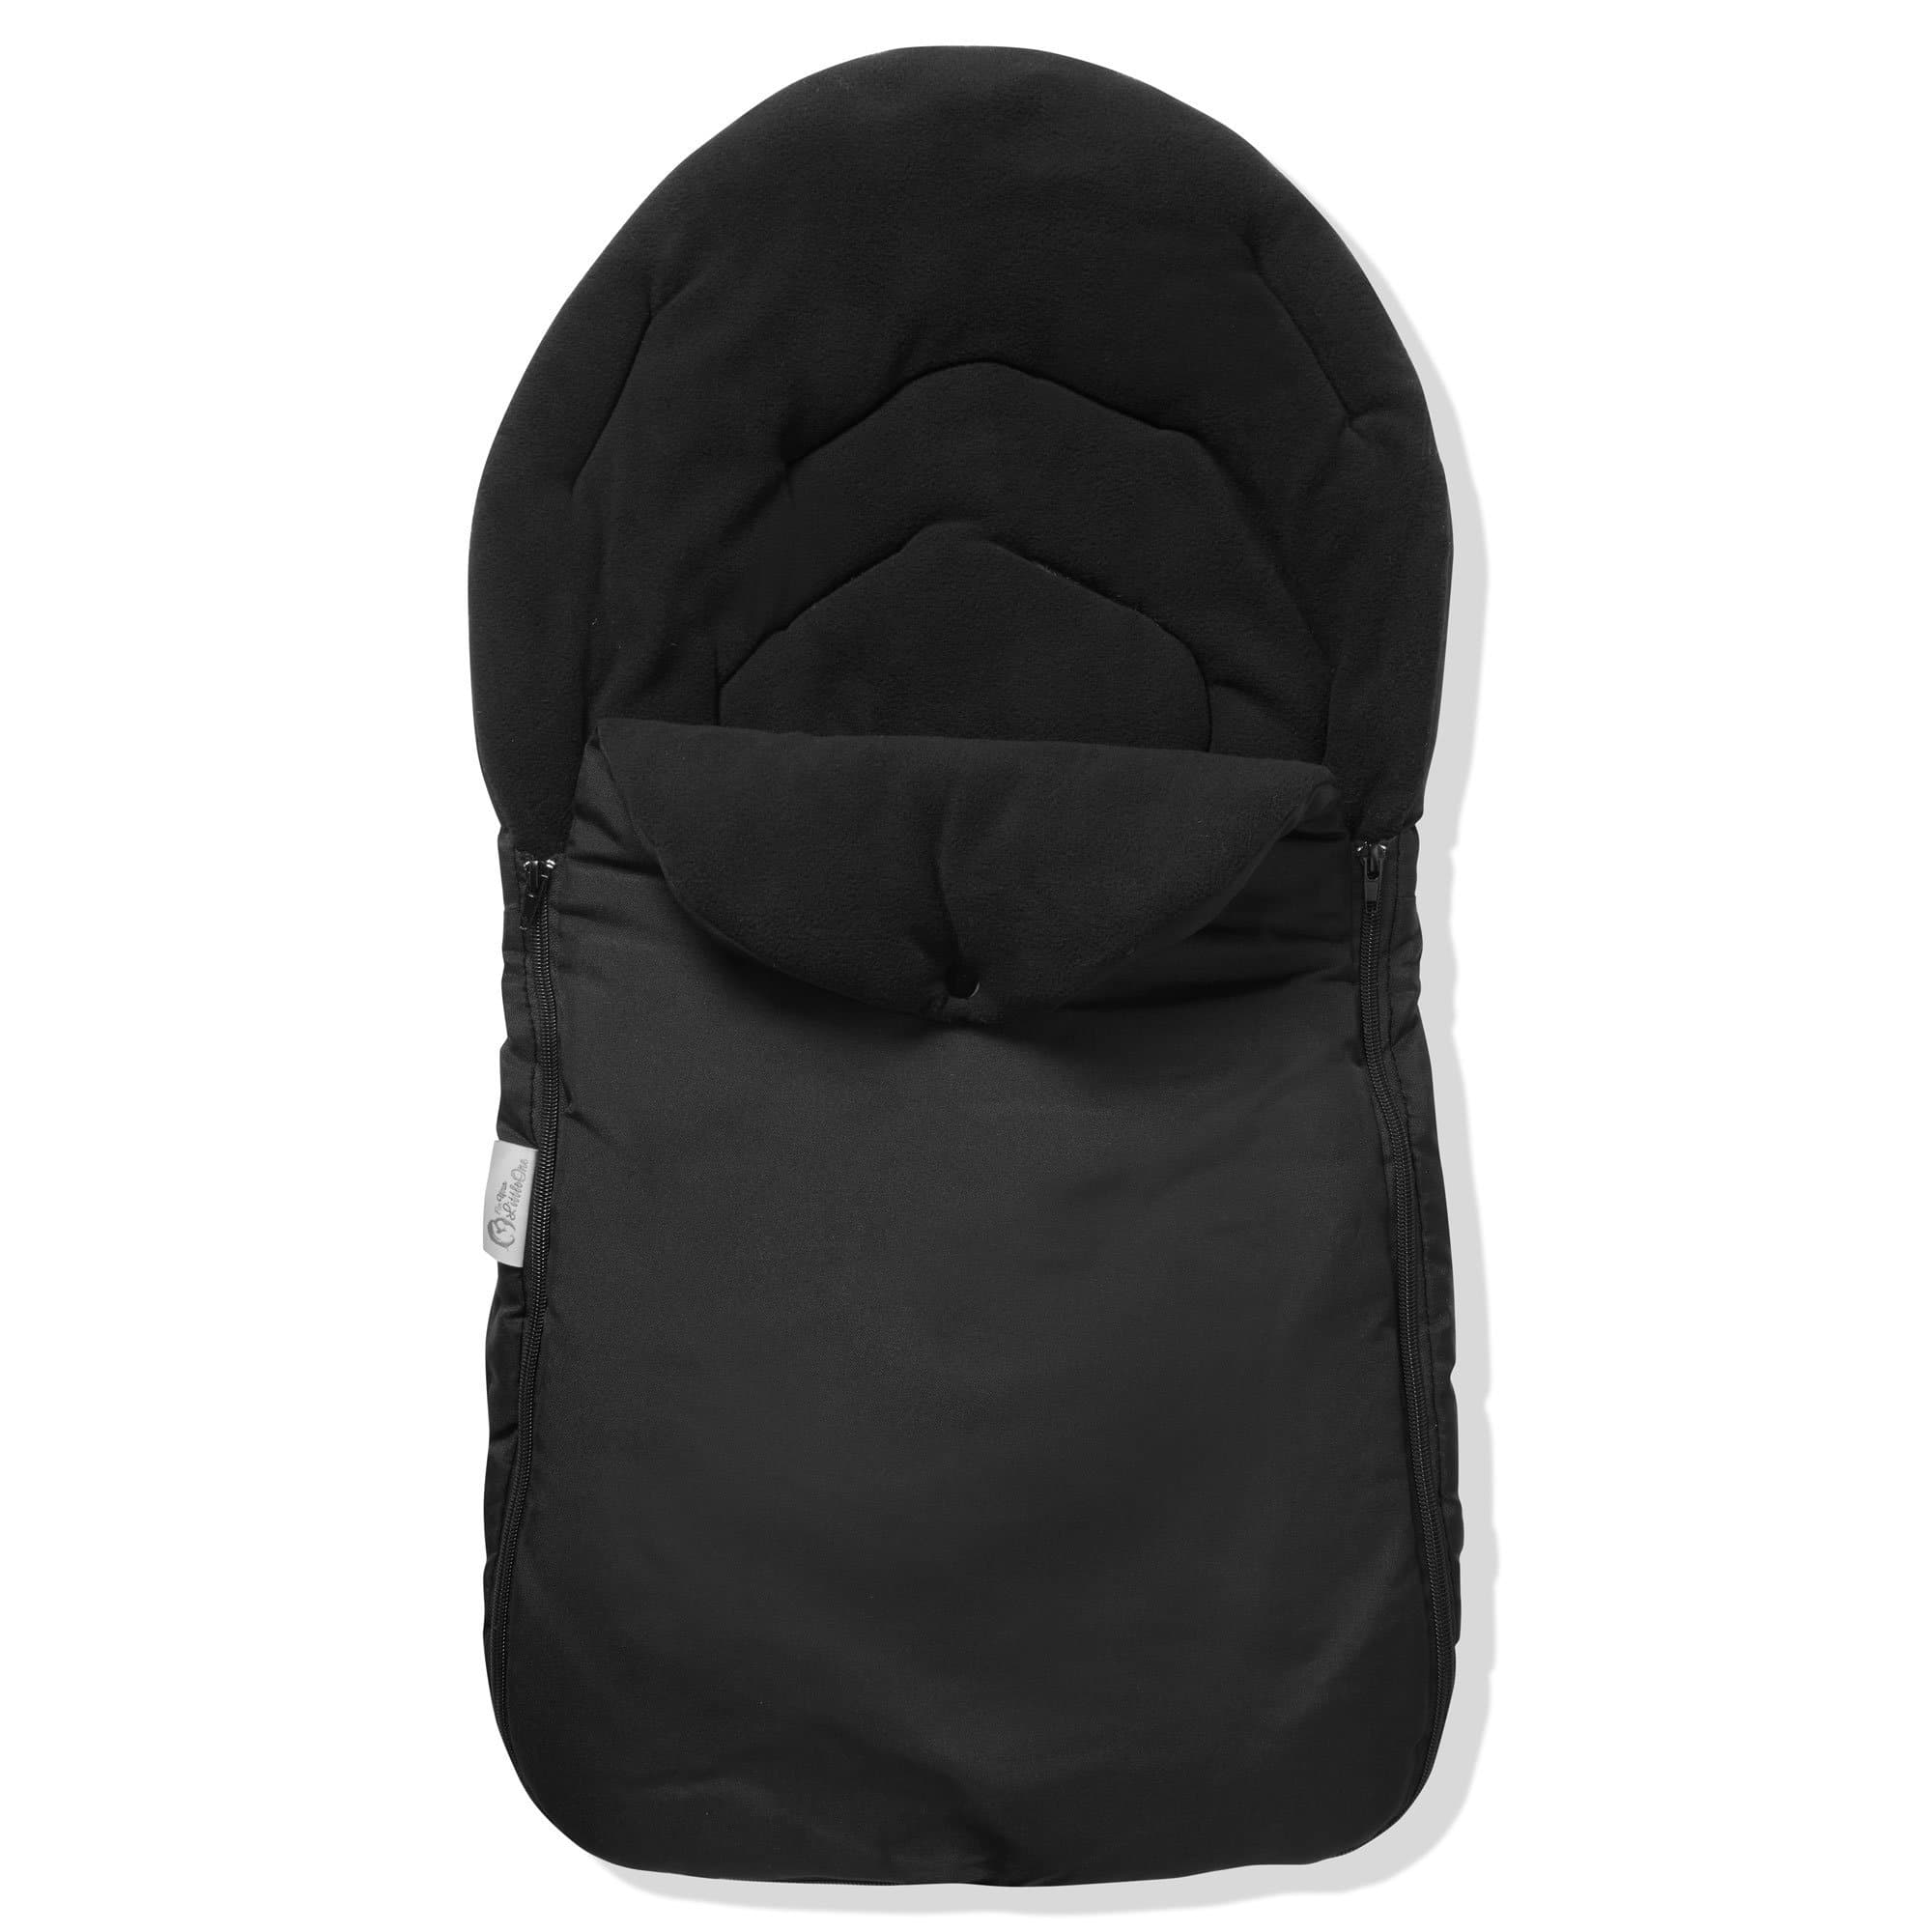 Car Seat Footmuff / Cosy Toes Compatible with Jane - Black / Fits All Models | For Your Little One